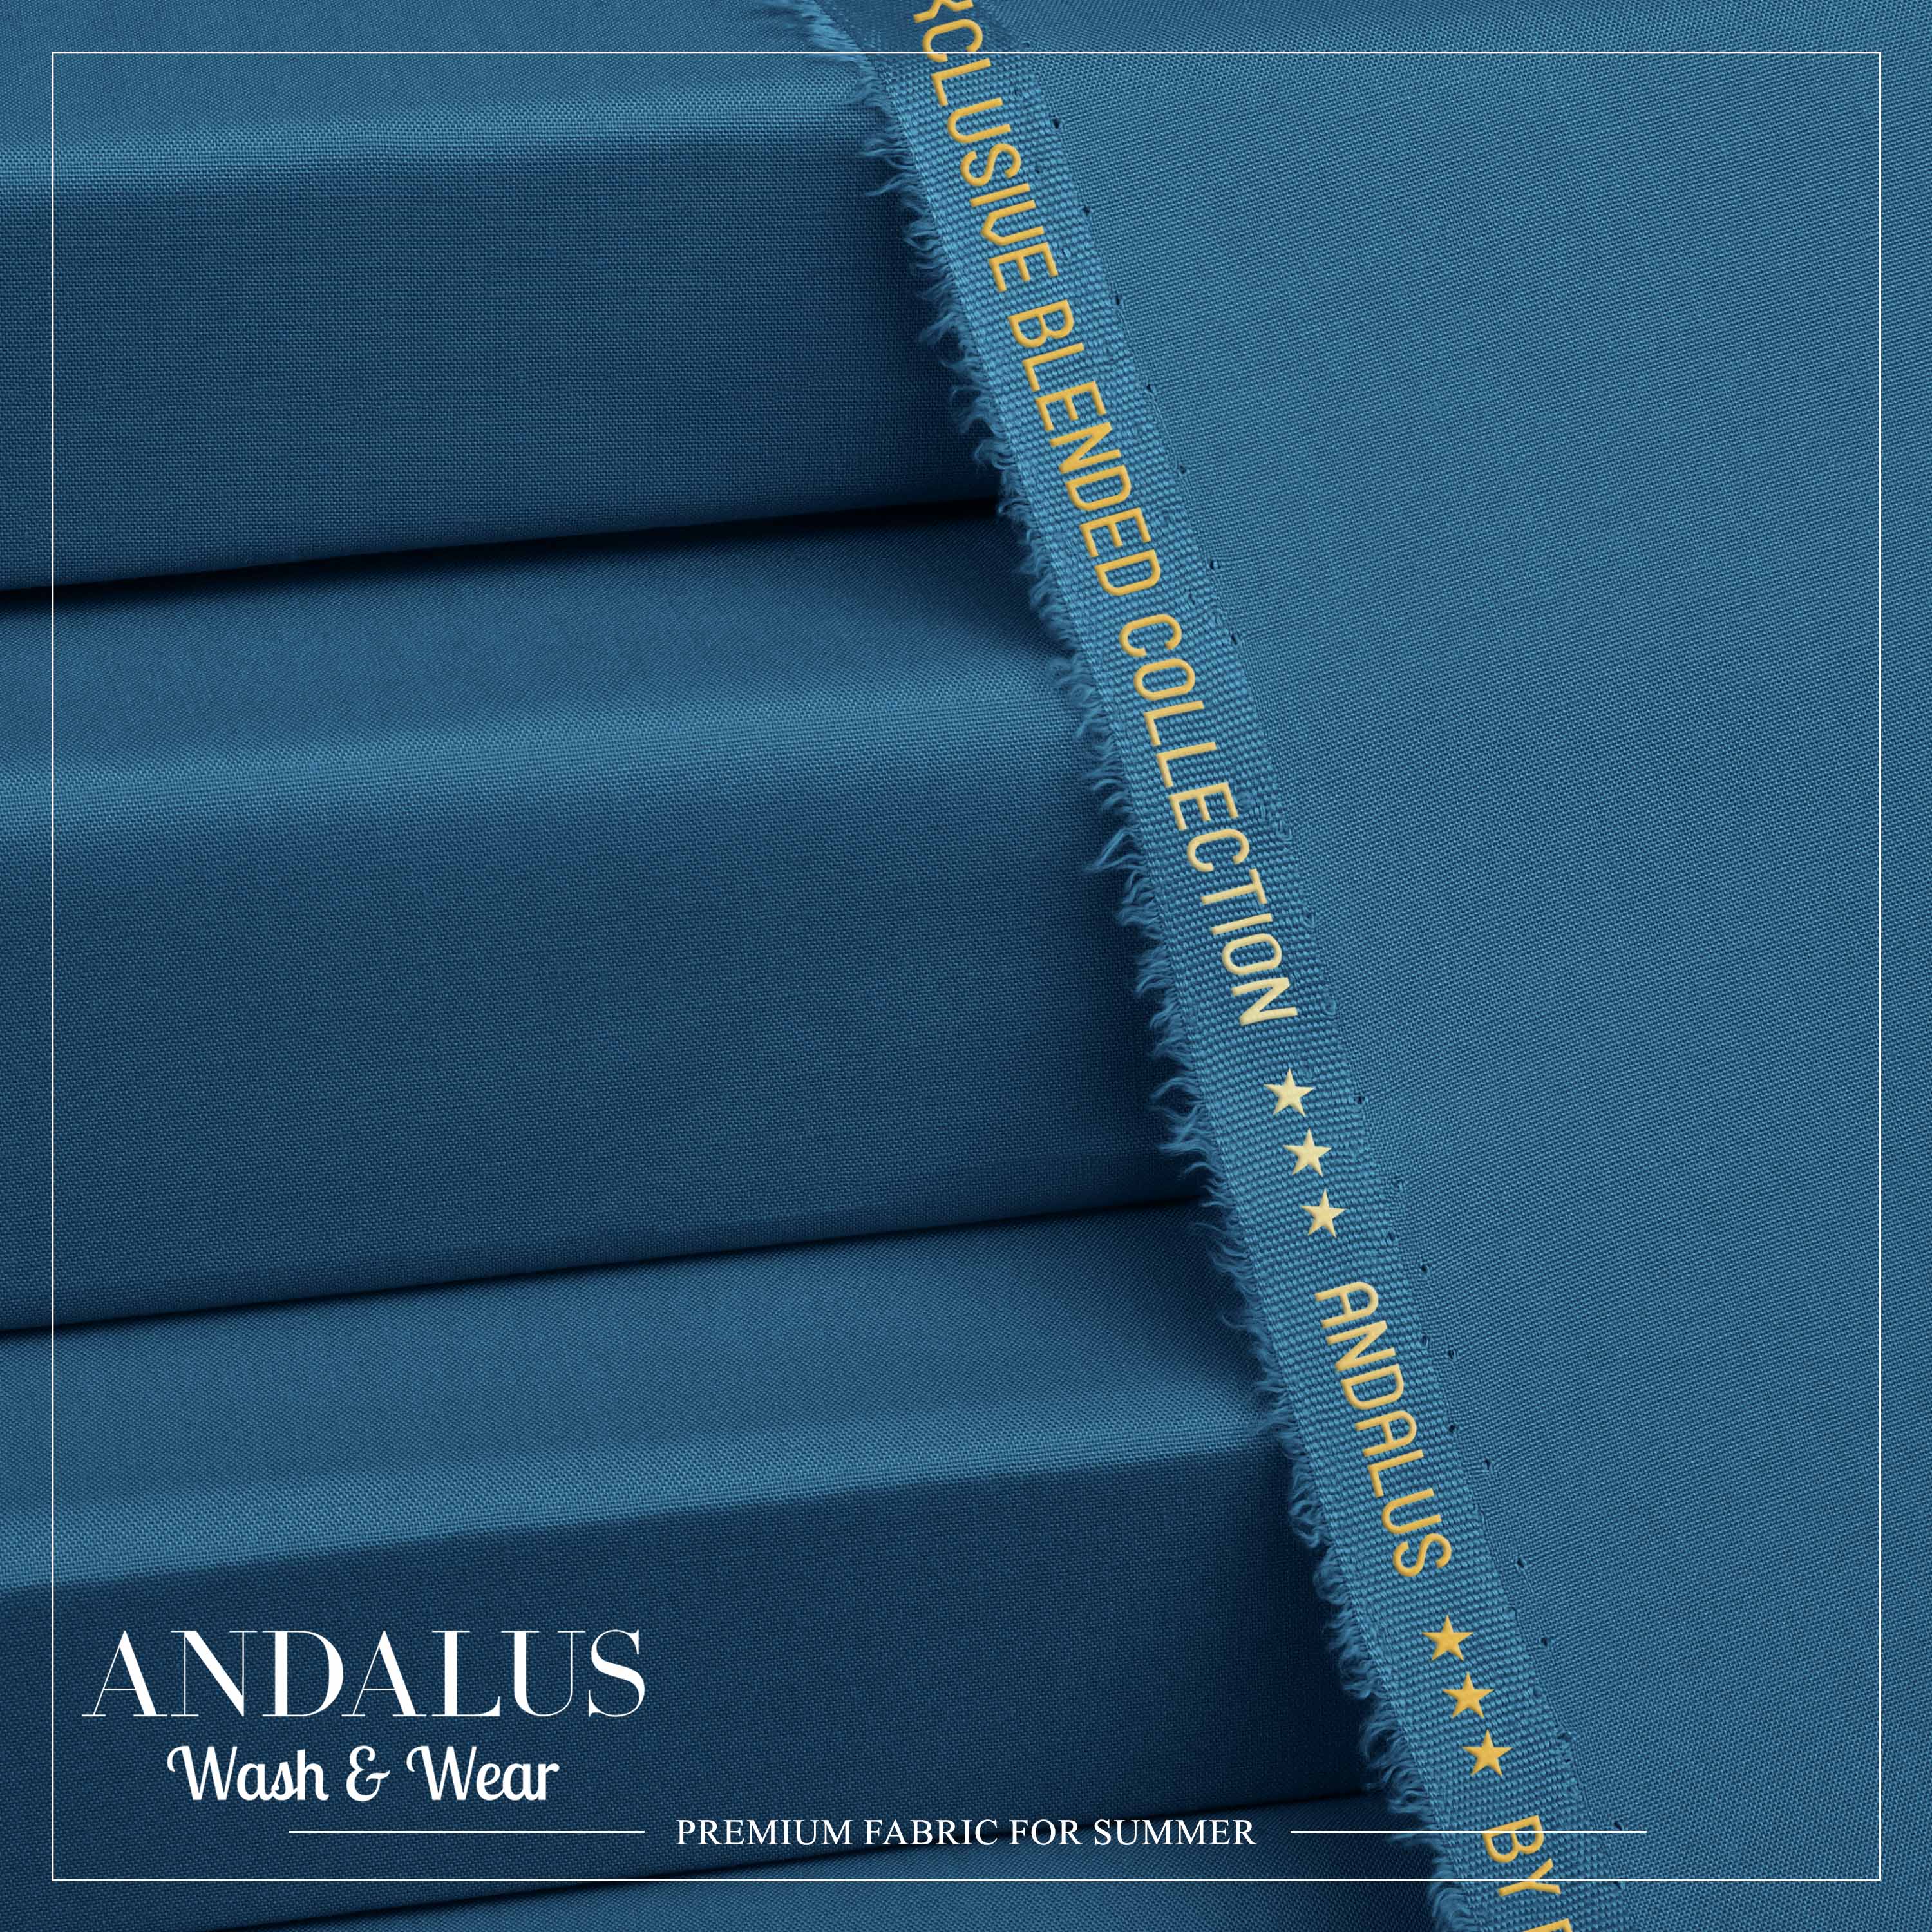 Sapphire Blue - Andalus - Wash & Wear Fabric